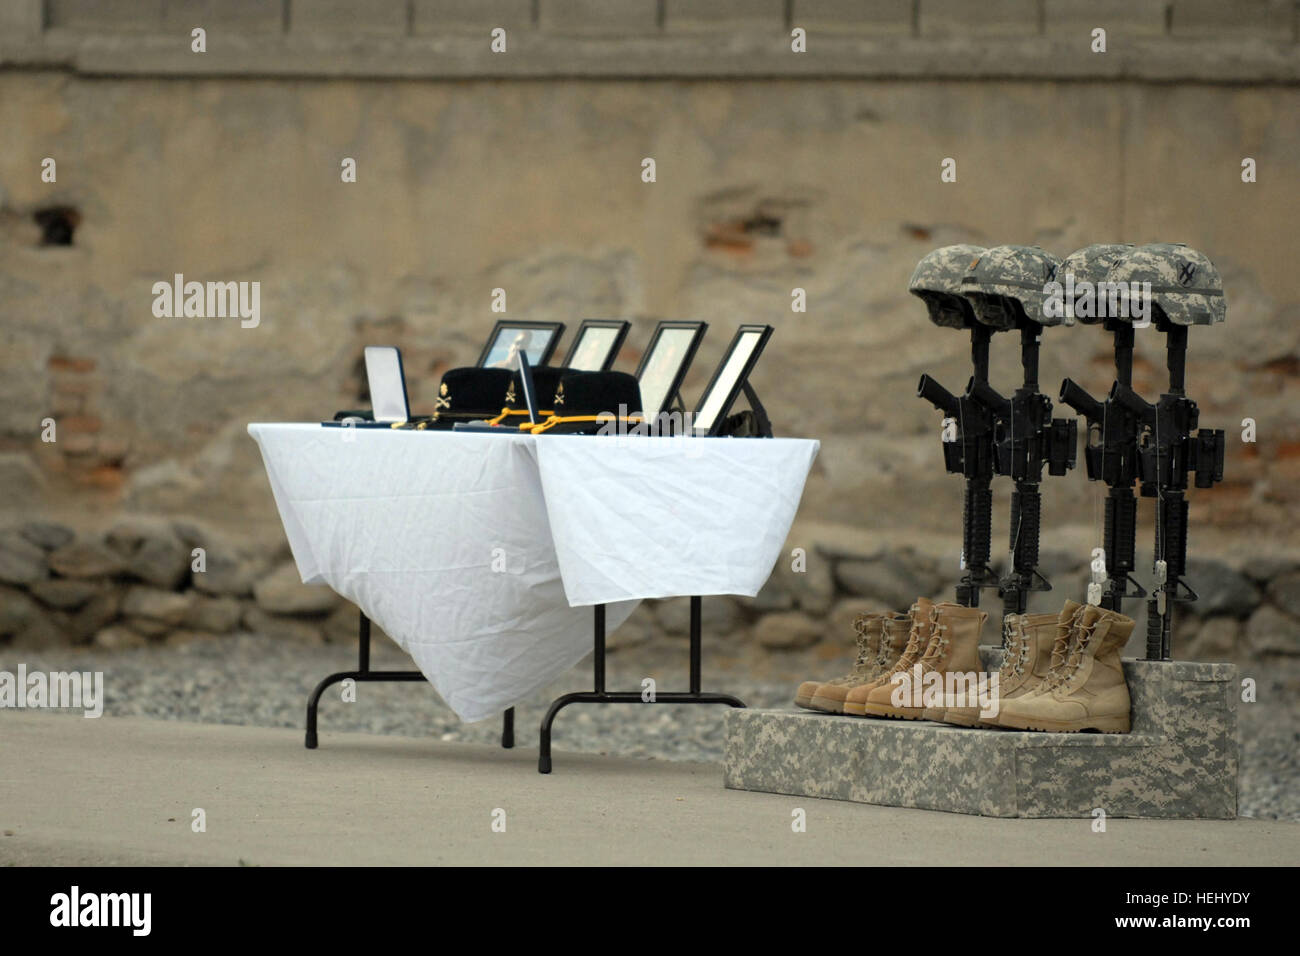 Field crosses and a memorial display stand as a reminder at Camp Phoenix in Kabul, Afghanistan, of the sacrifice the following Soldiers made for their country, Maj. Kevin M. Jenrette, 37, of Lula, Ga., Sgt. 1st Class John C. Beale, 39, of Riverdale, Ga., and Spc. Jeffrey W. Jordan, 21, of Rome, Ga., three members of the 1st Battalion, 108th Reconnaissance, Surveillance and Target Acquisition Squadron, 48th Infantry Brigade Combat Team, Georgia Army National Guard, Calhoun, Ga., and Maj. Rocco M. Barnes of the California Army National Guard. Guard members honor fallen comrades 179141 Stock Photo